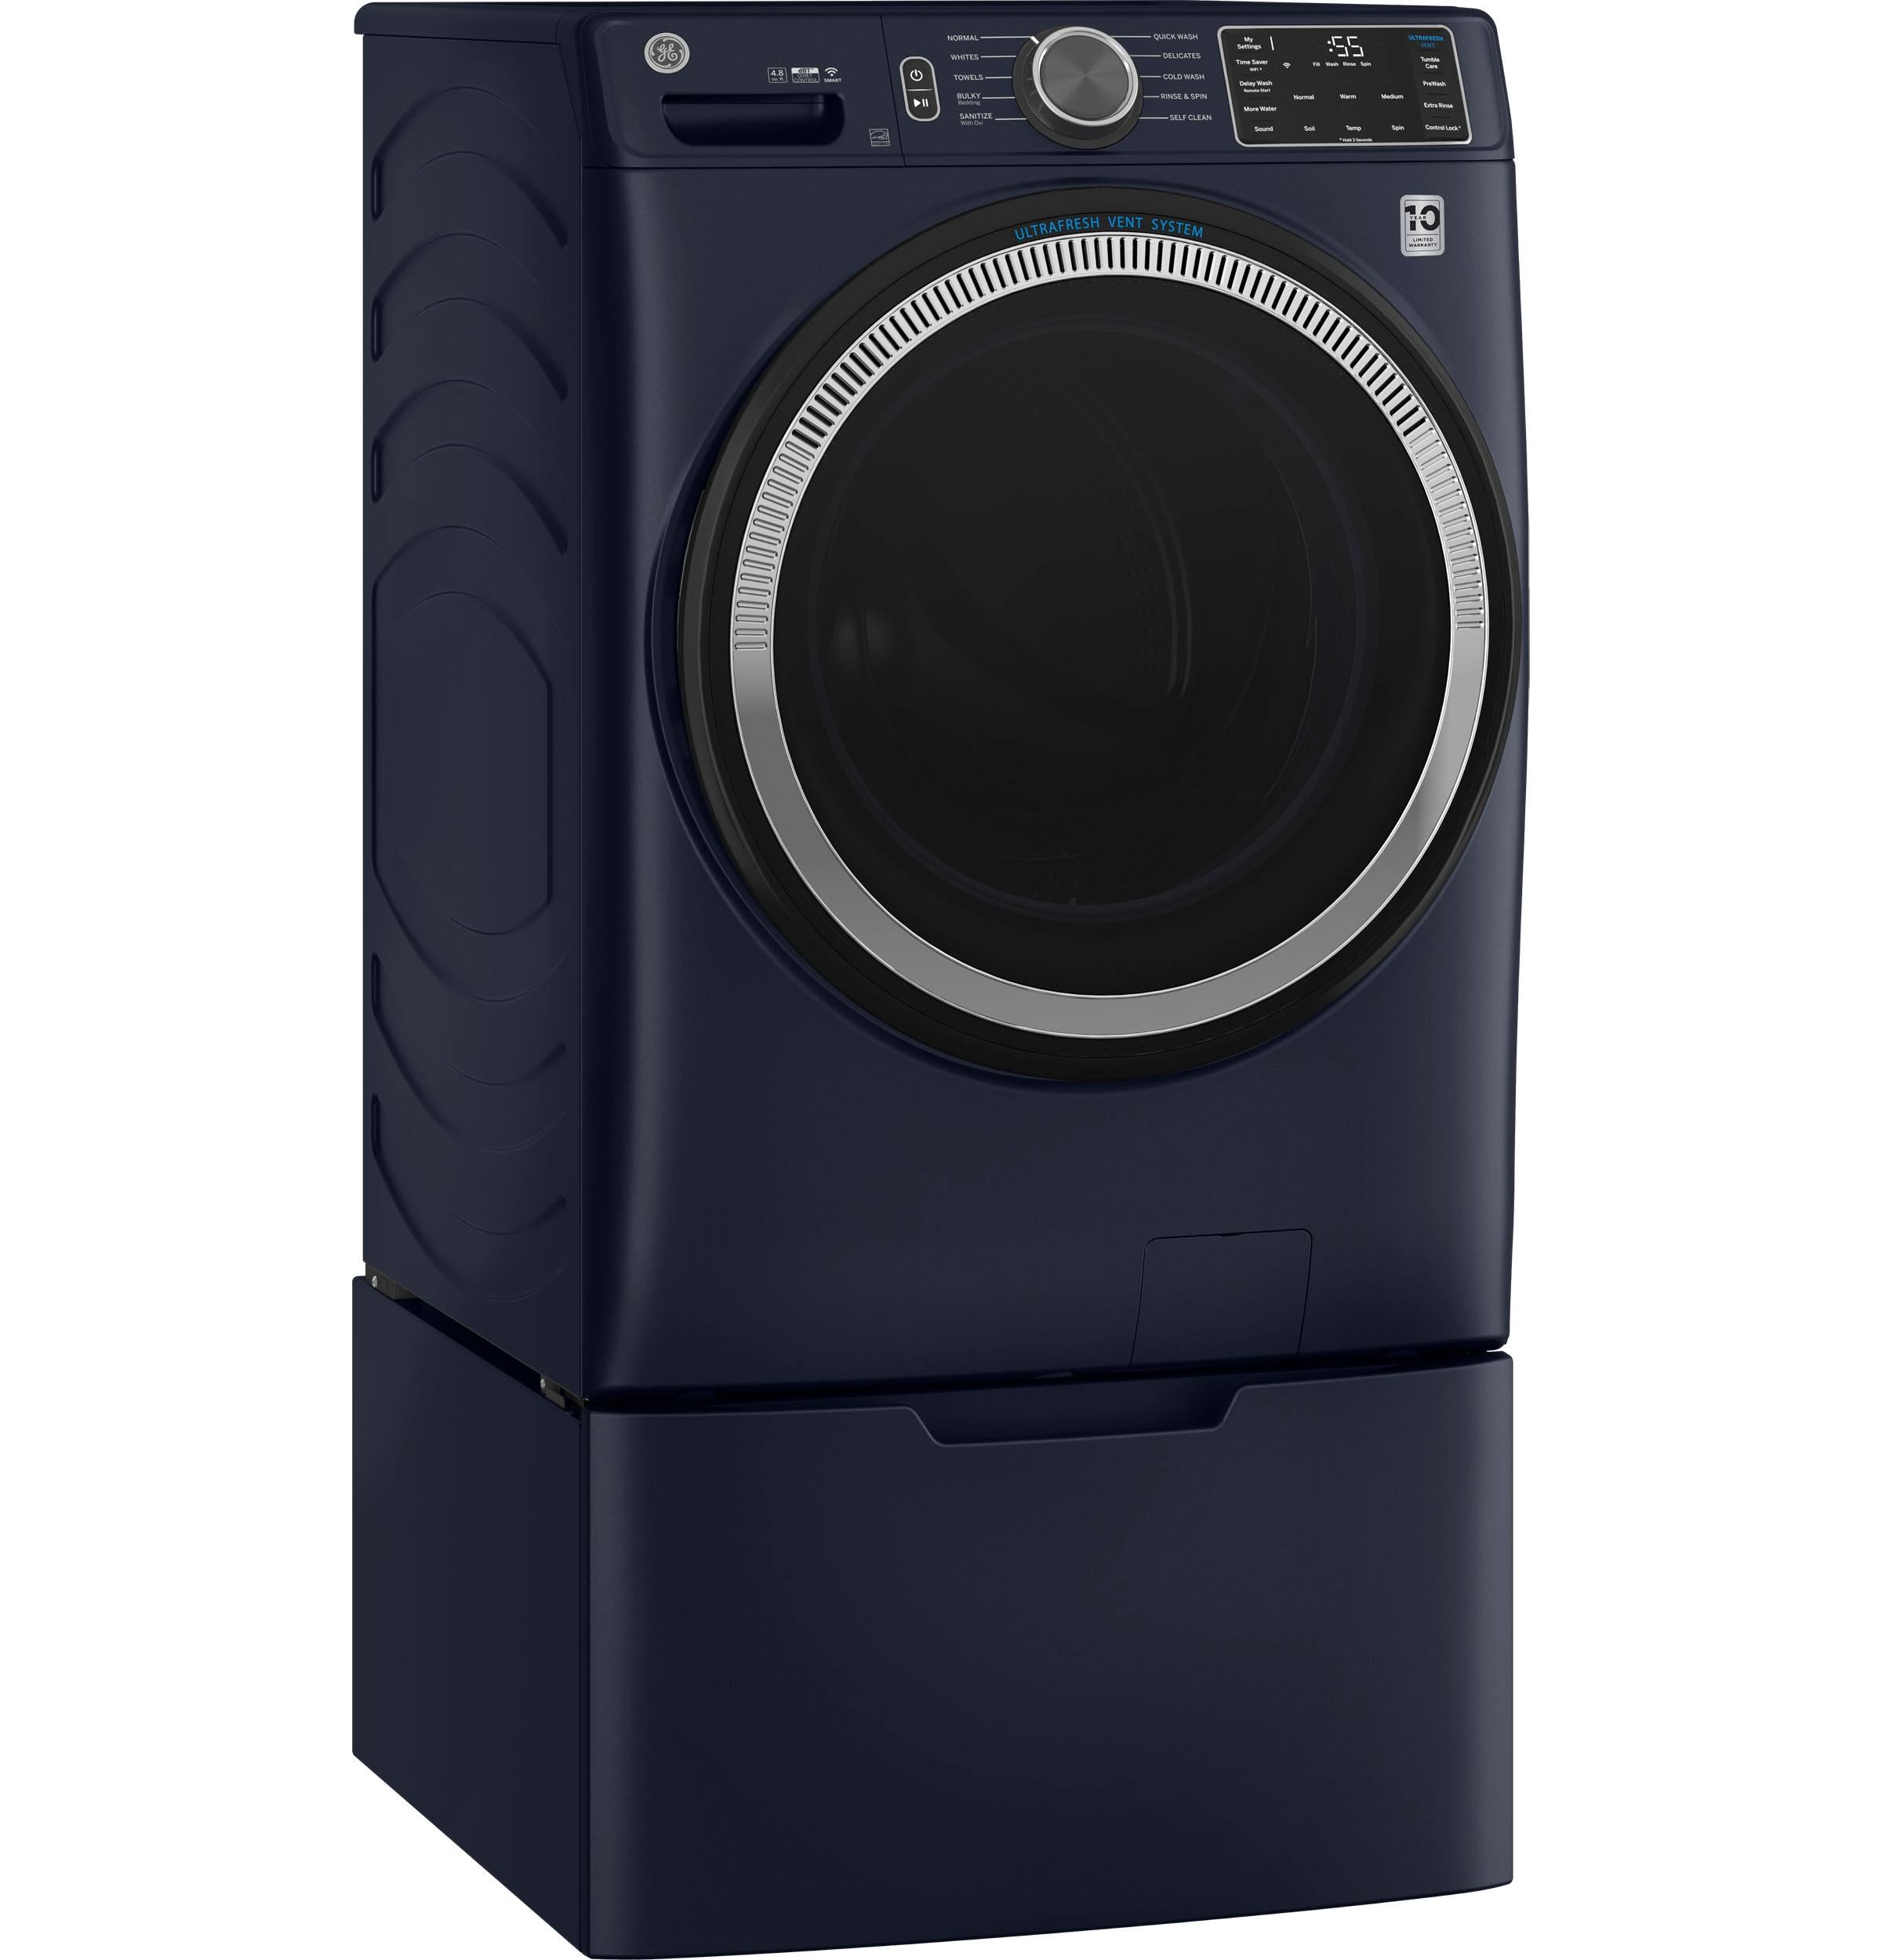 GE GFW550SSNWW 28 Inch Smart Front Load Washer with 4.8 cu. ft. Capacity,  10 Cycles, UltraFresh Vent System With OdorBlock™, Microban® Antimicrobial  Technology, 1300 RPM, Sanitize with Oxi, Time Saver Option, Sanitize